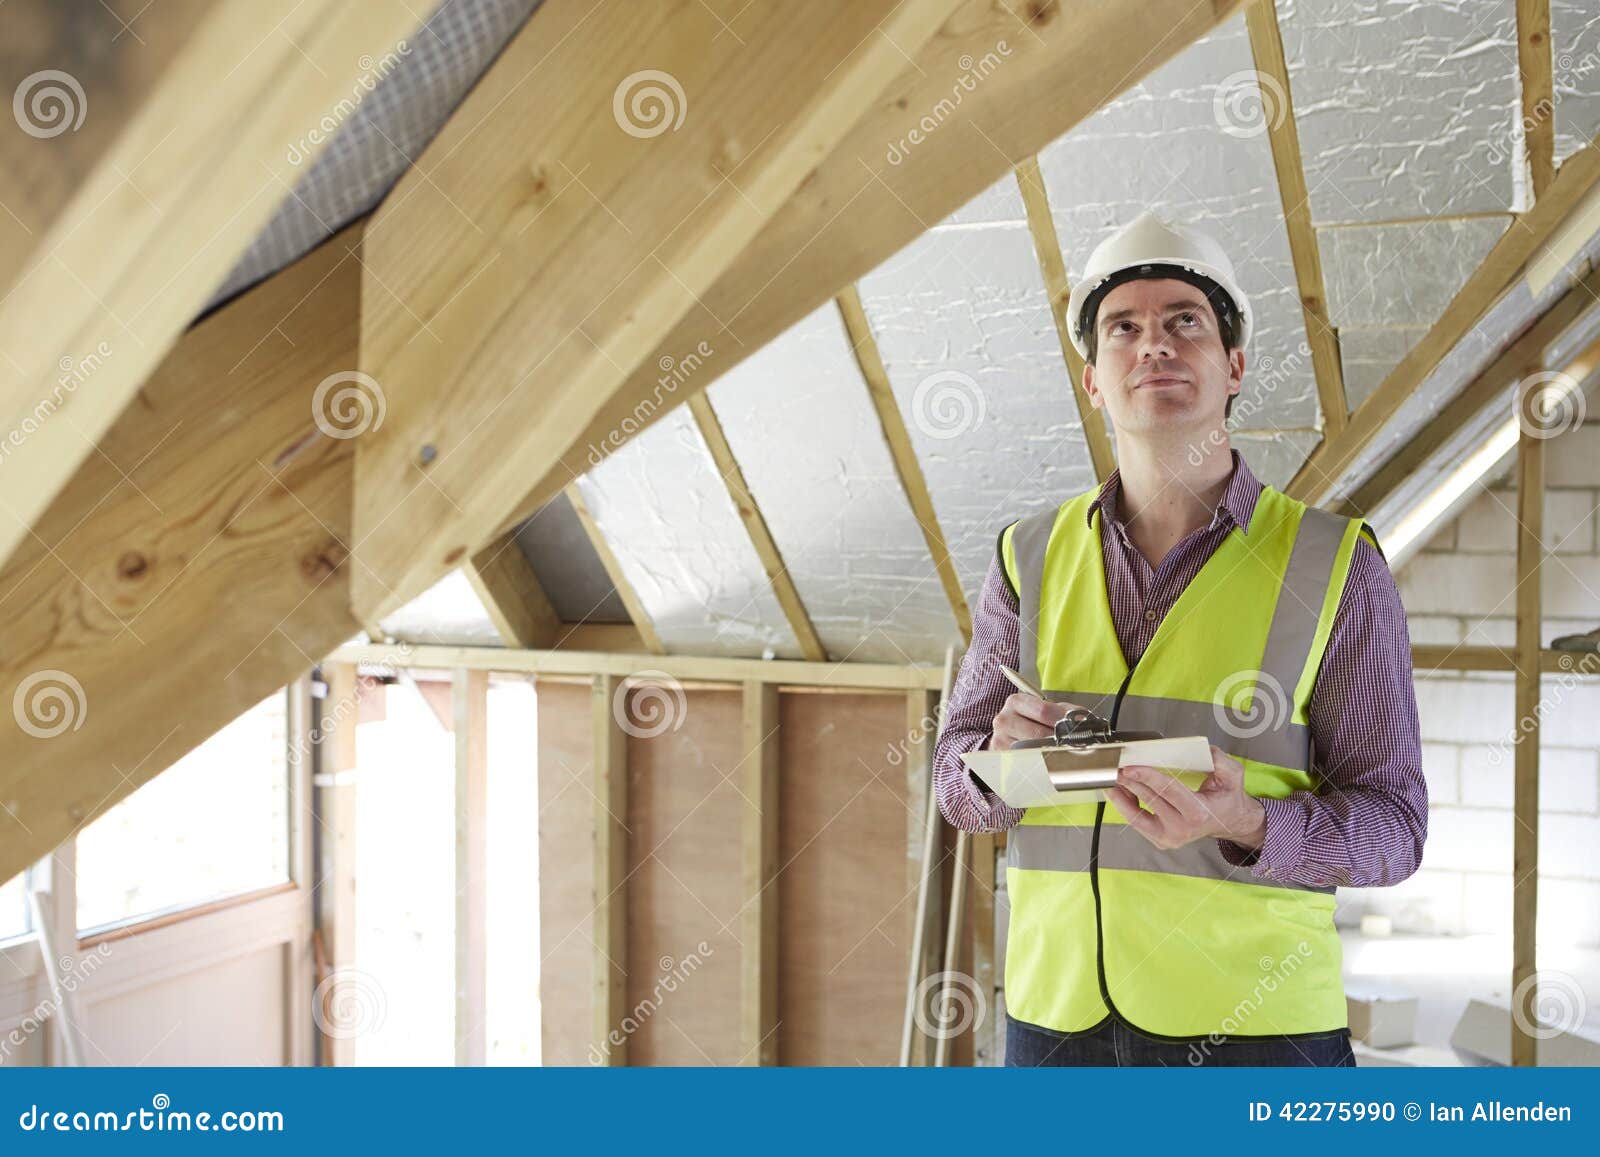 building inspector looking at new property